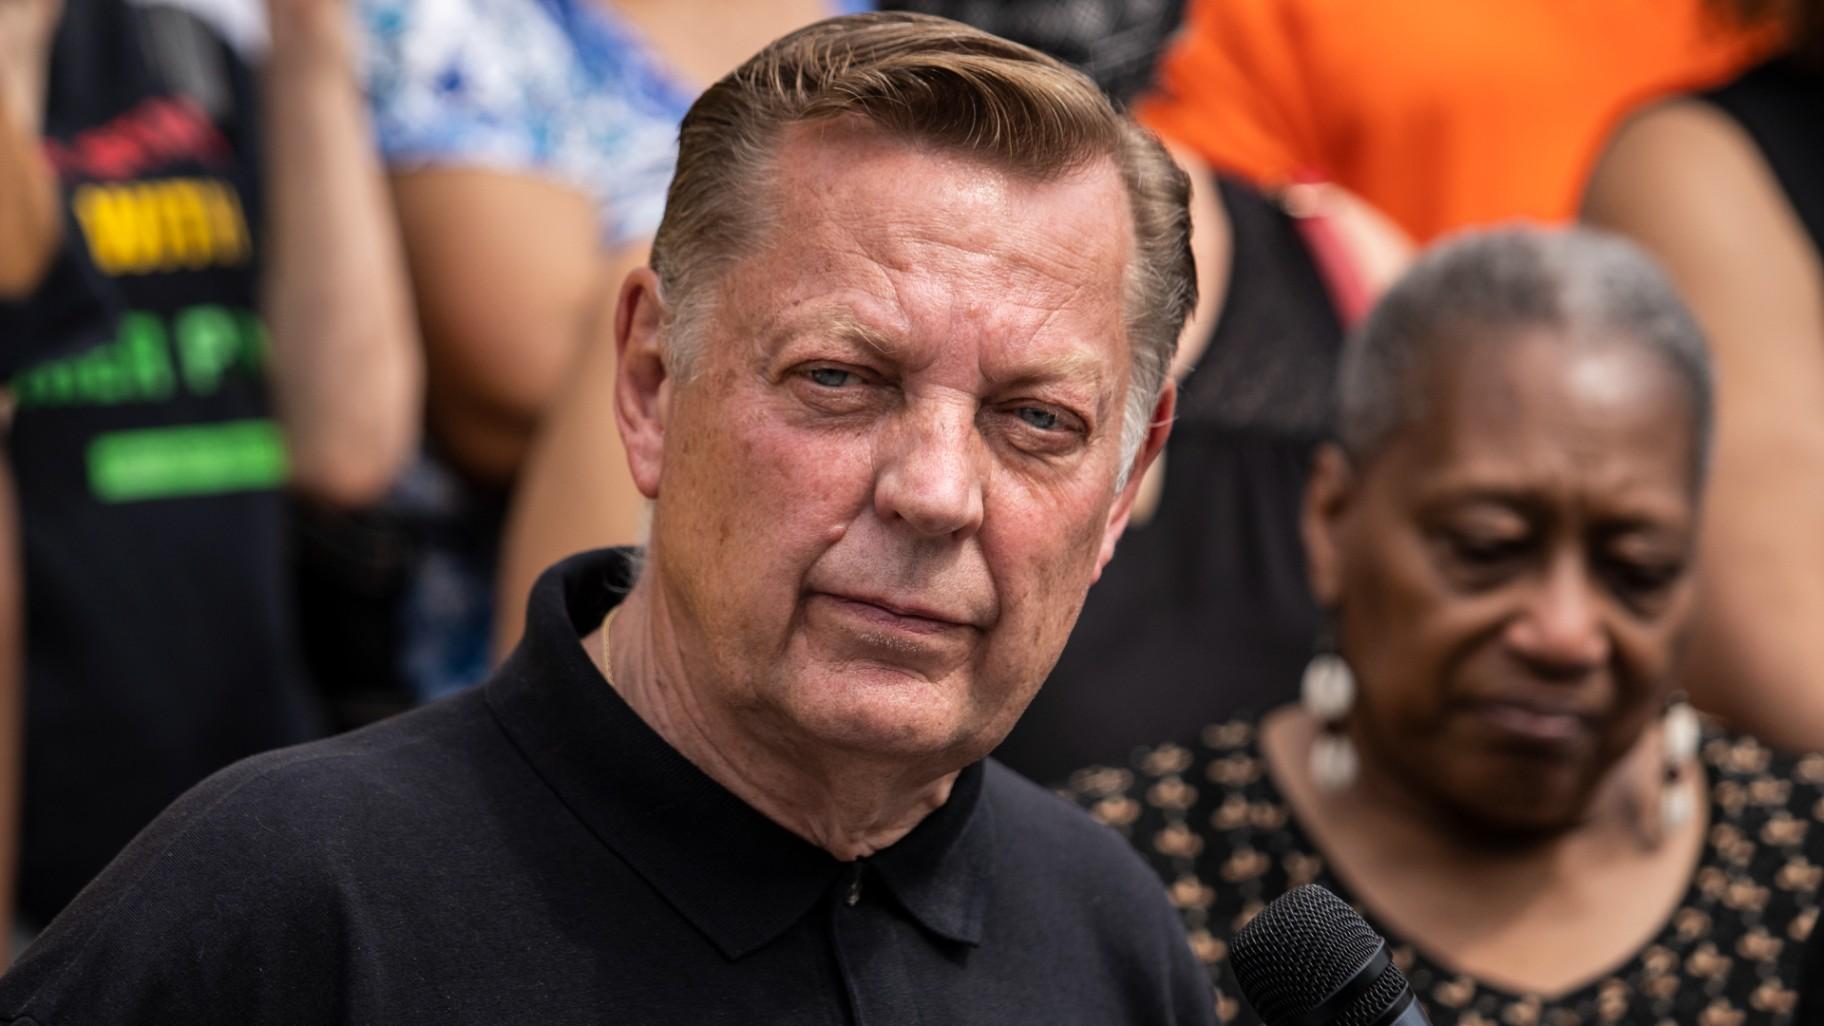 WTTW News: Chicago Archdiocese Officials Clear the Rev. Michael Pfleger of Abuse Claim